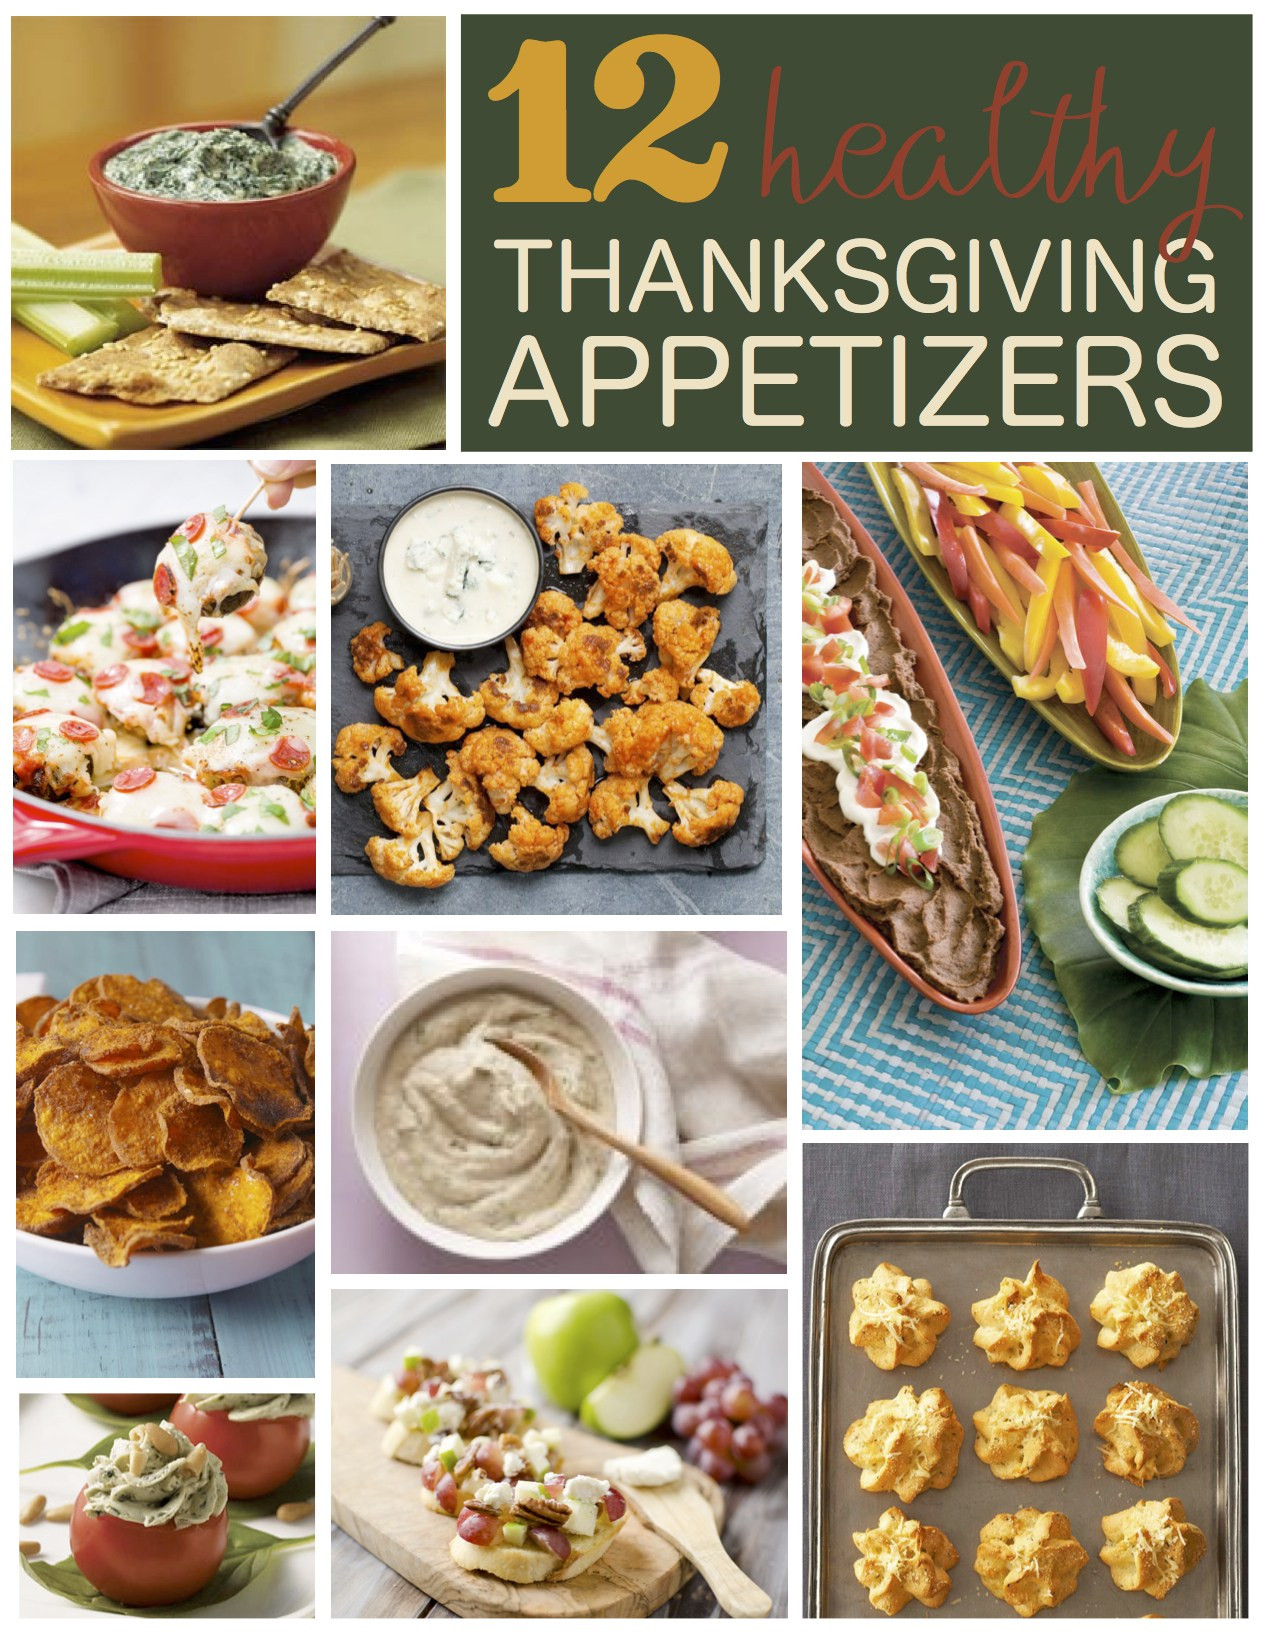 Healthy Thanksgiving Appetizer Recipes
 12 Healthy Thanksgiving Appetizer Recipes Six Clever Sisters